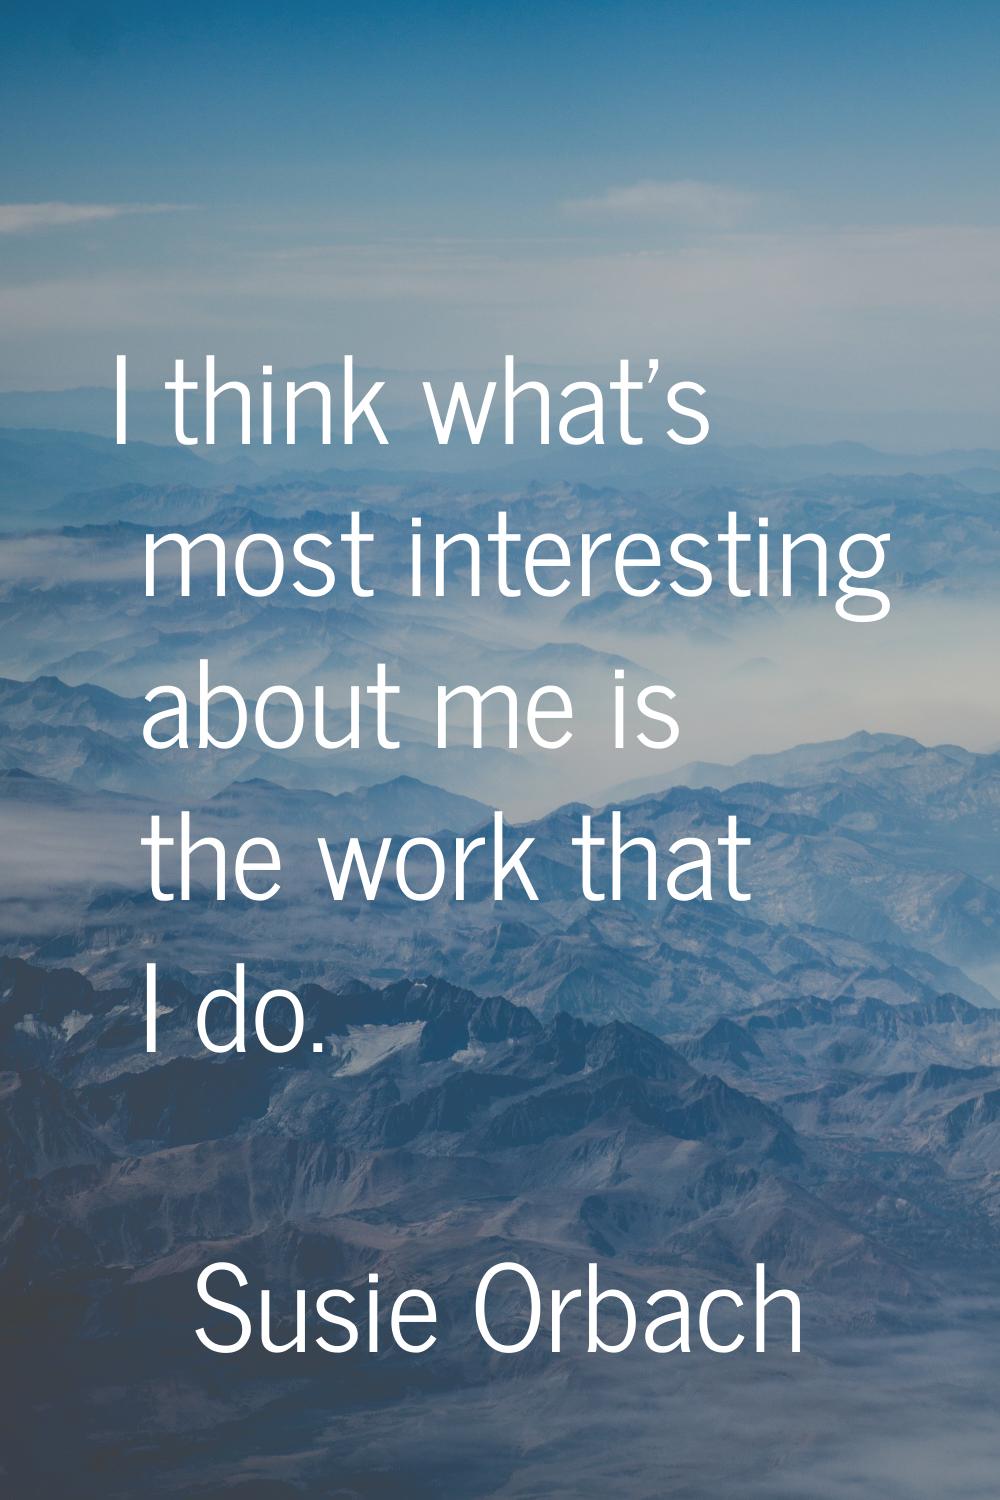 I think what's most interesting about me is the work that I do.